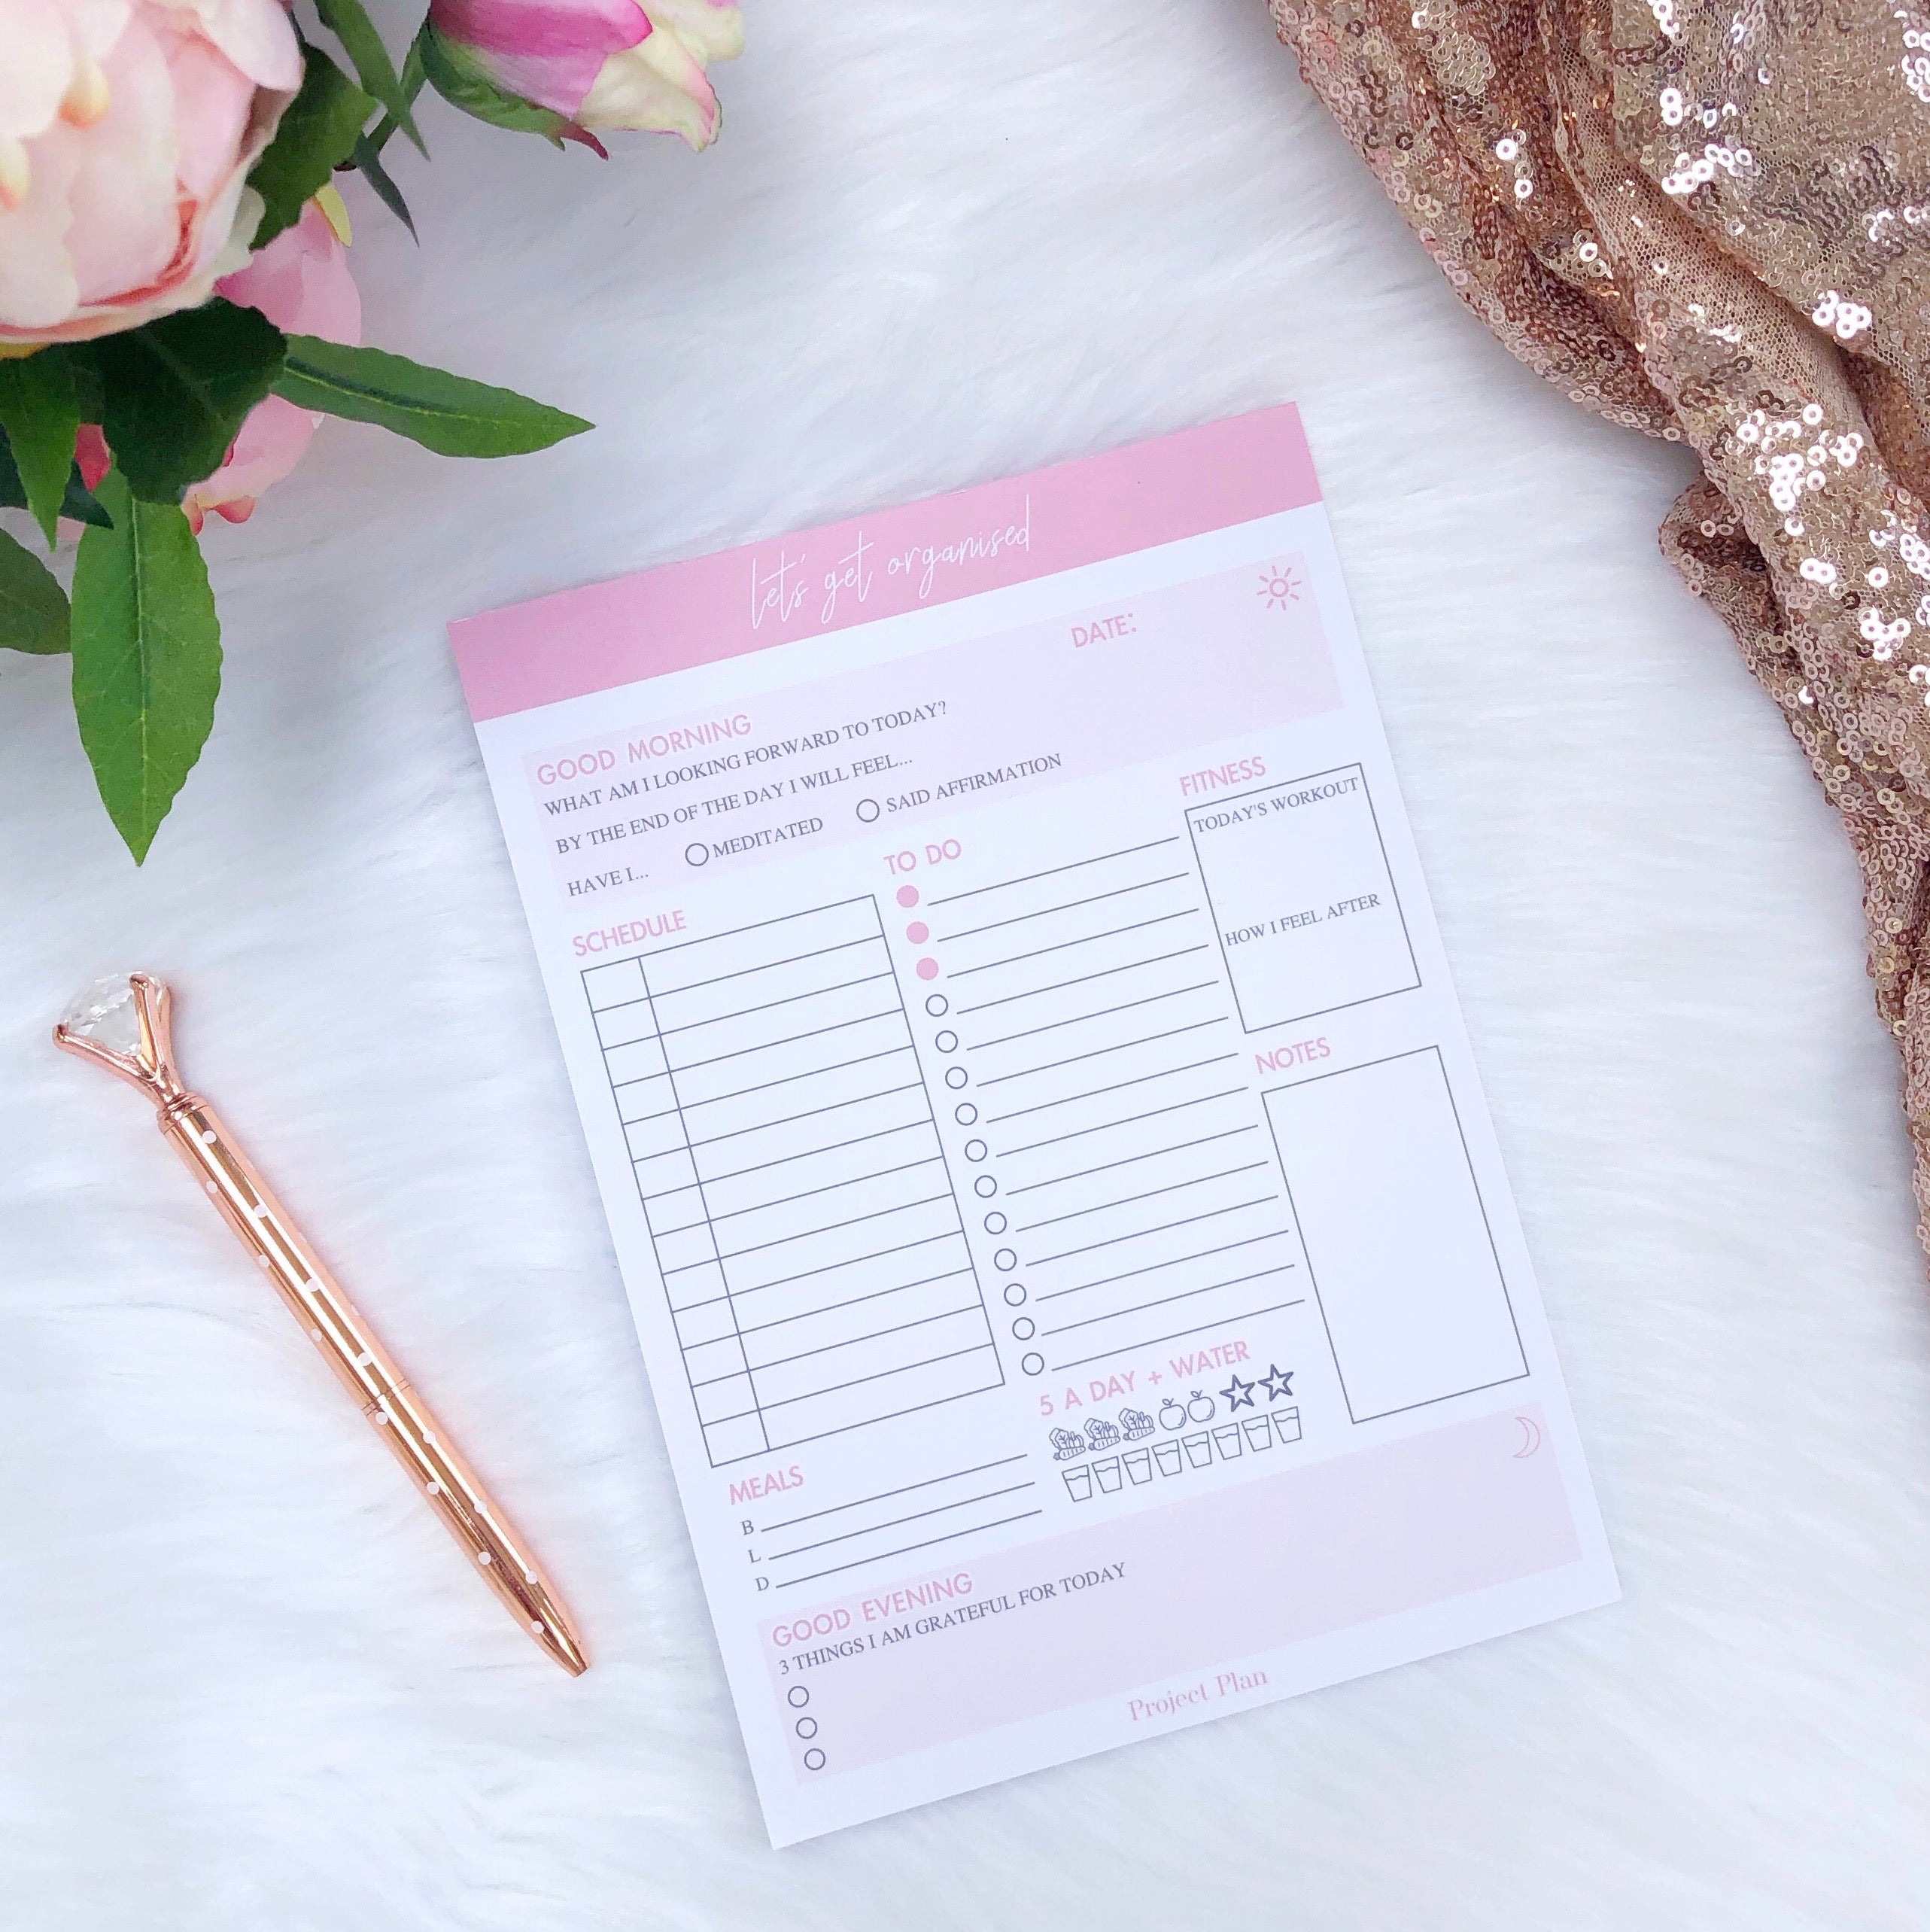 Schedule Your Day For Success with the Let's Get Organised Planner